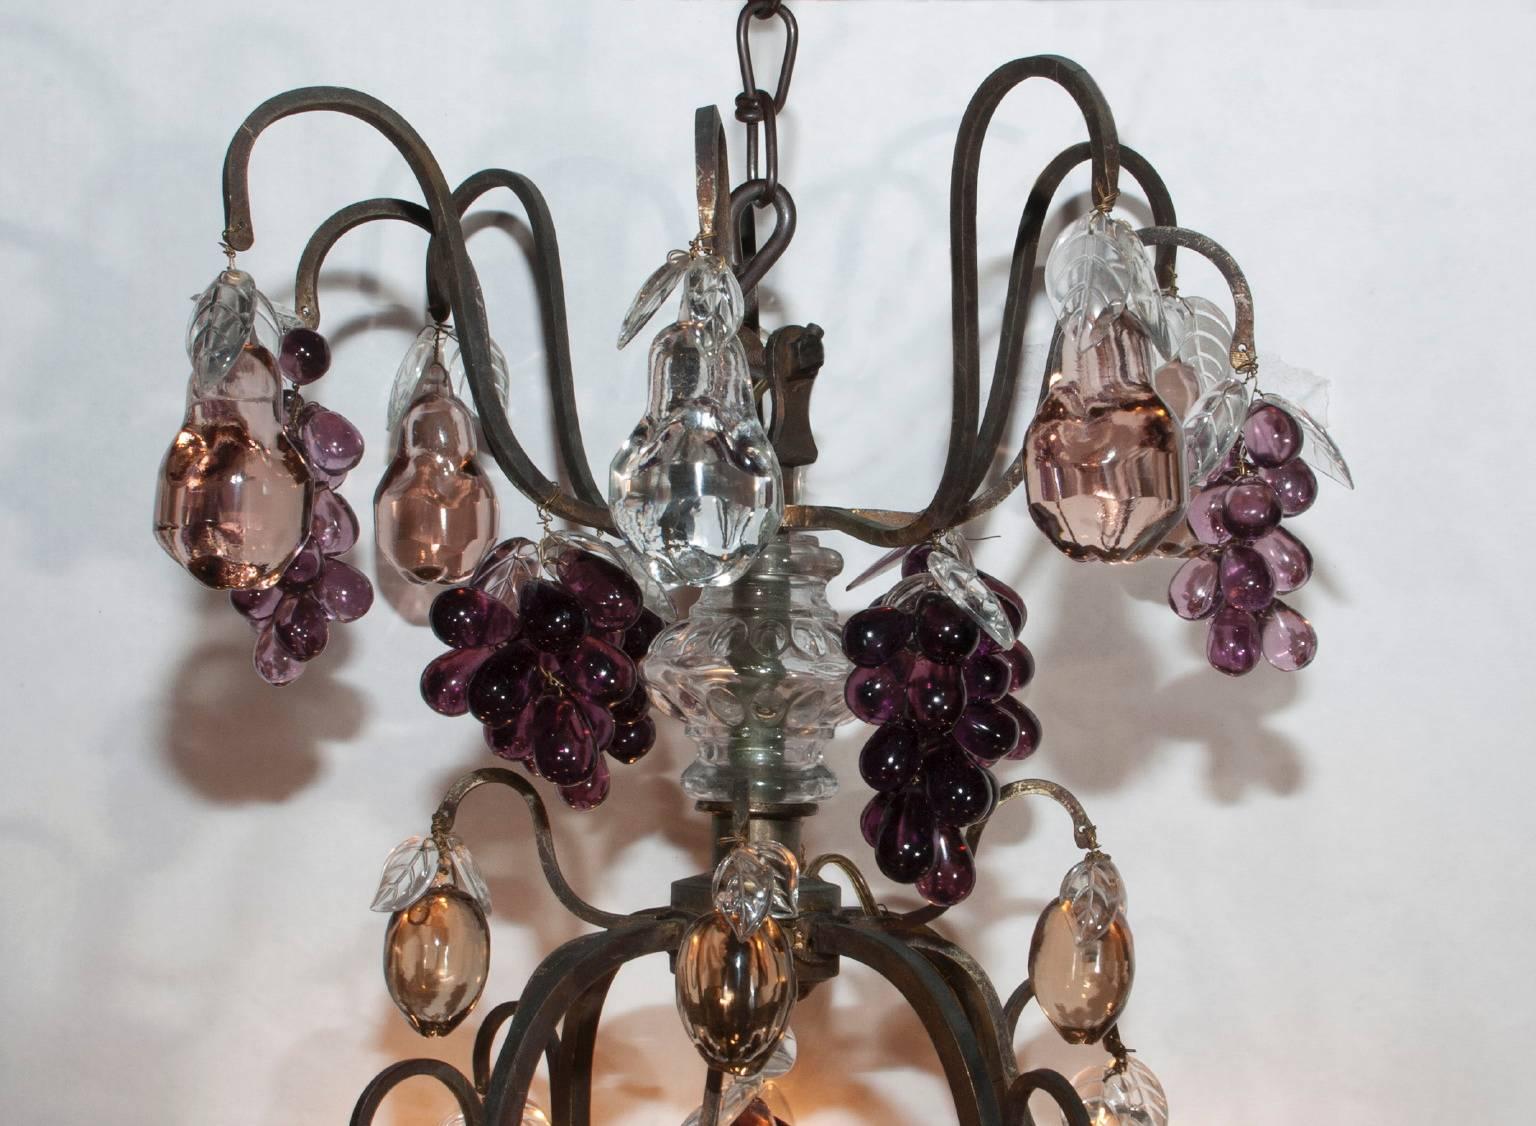 Truly symbolizing a bouquet of plenty, this 19th century chandelier is French made and draped in a variety of elegant colored Baccarat crystal fruit. Apples, pears and pomegranates all hung amidst bunches of dark purple grapes. An excellent fixture